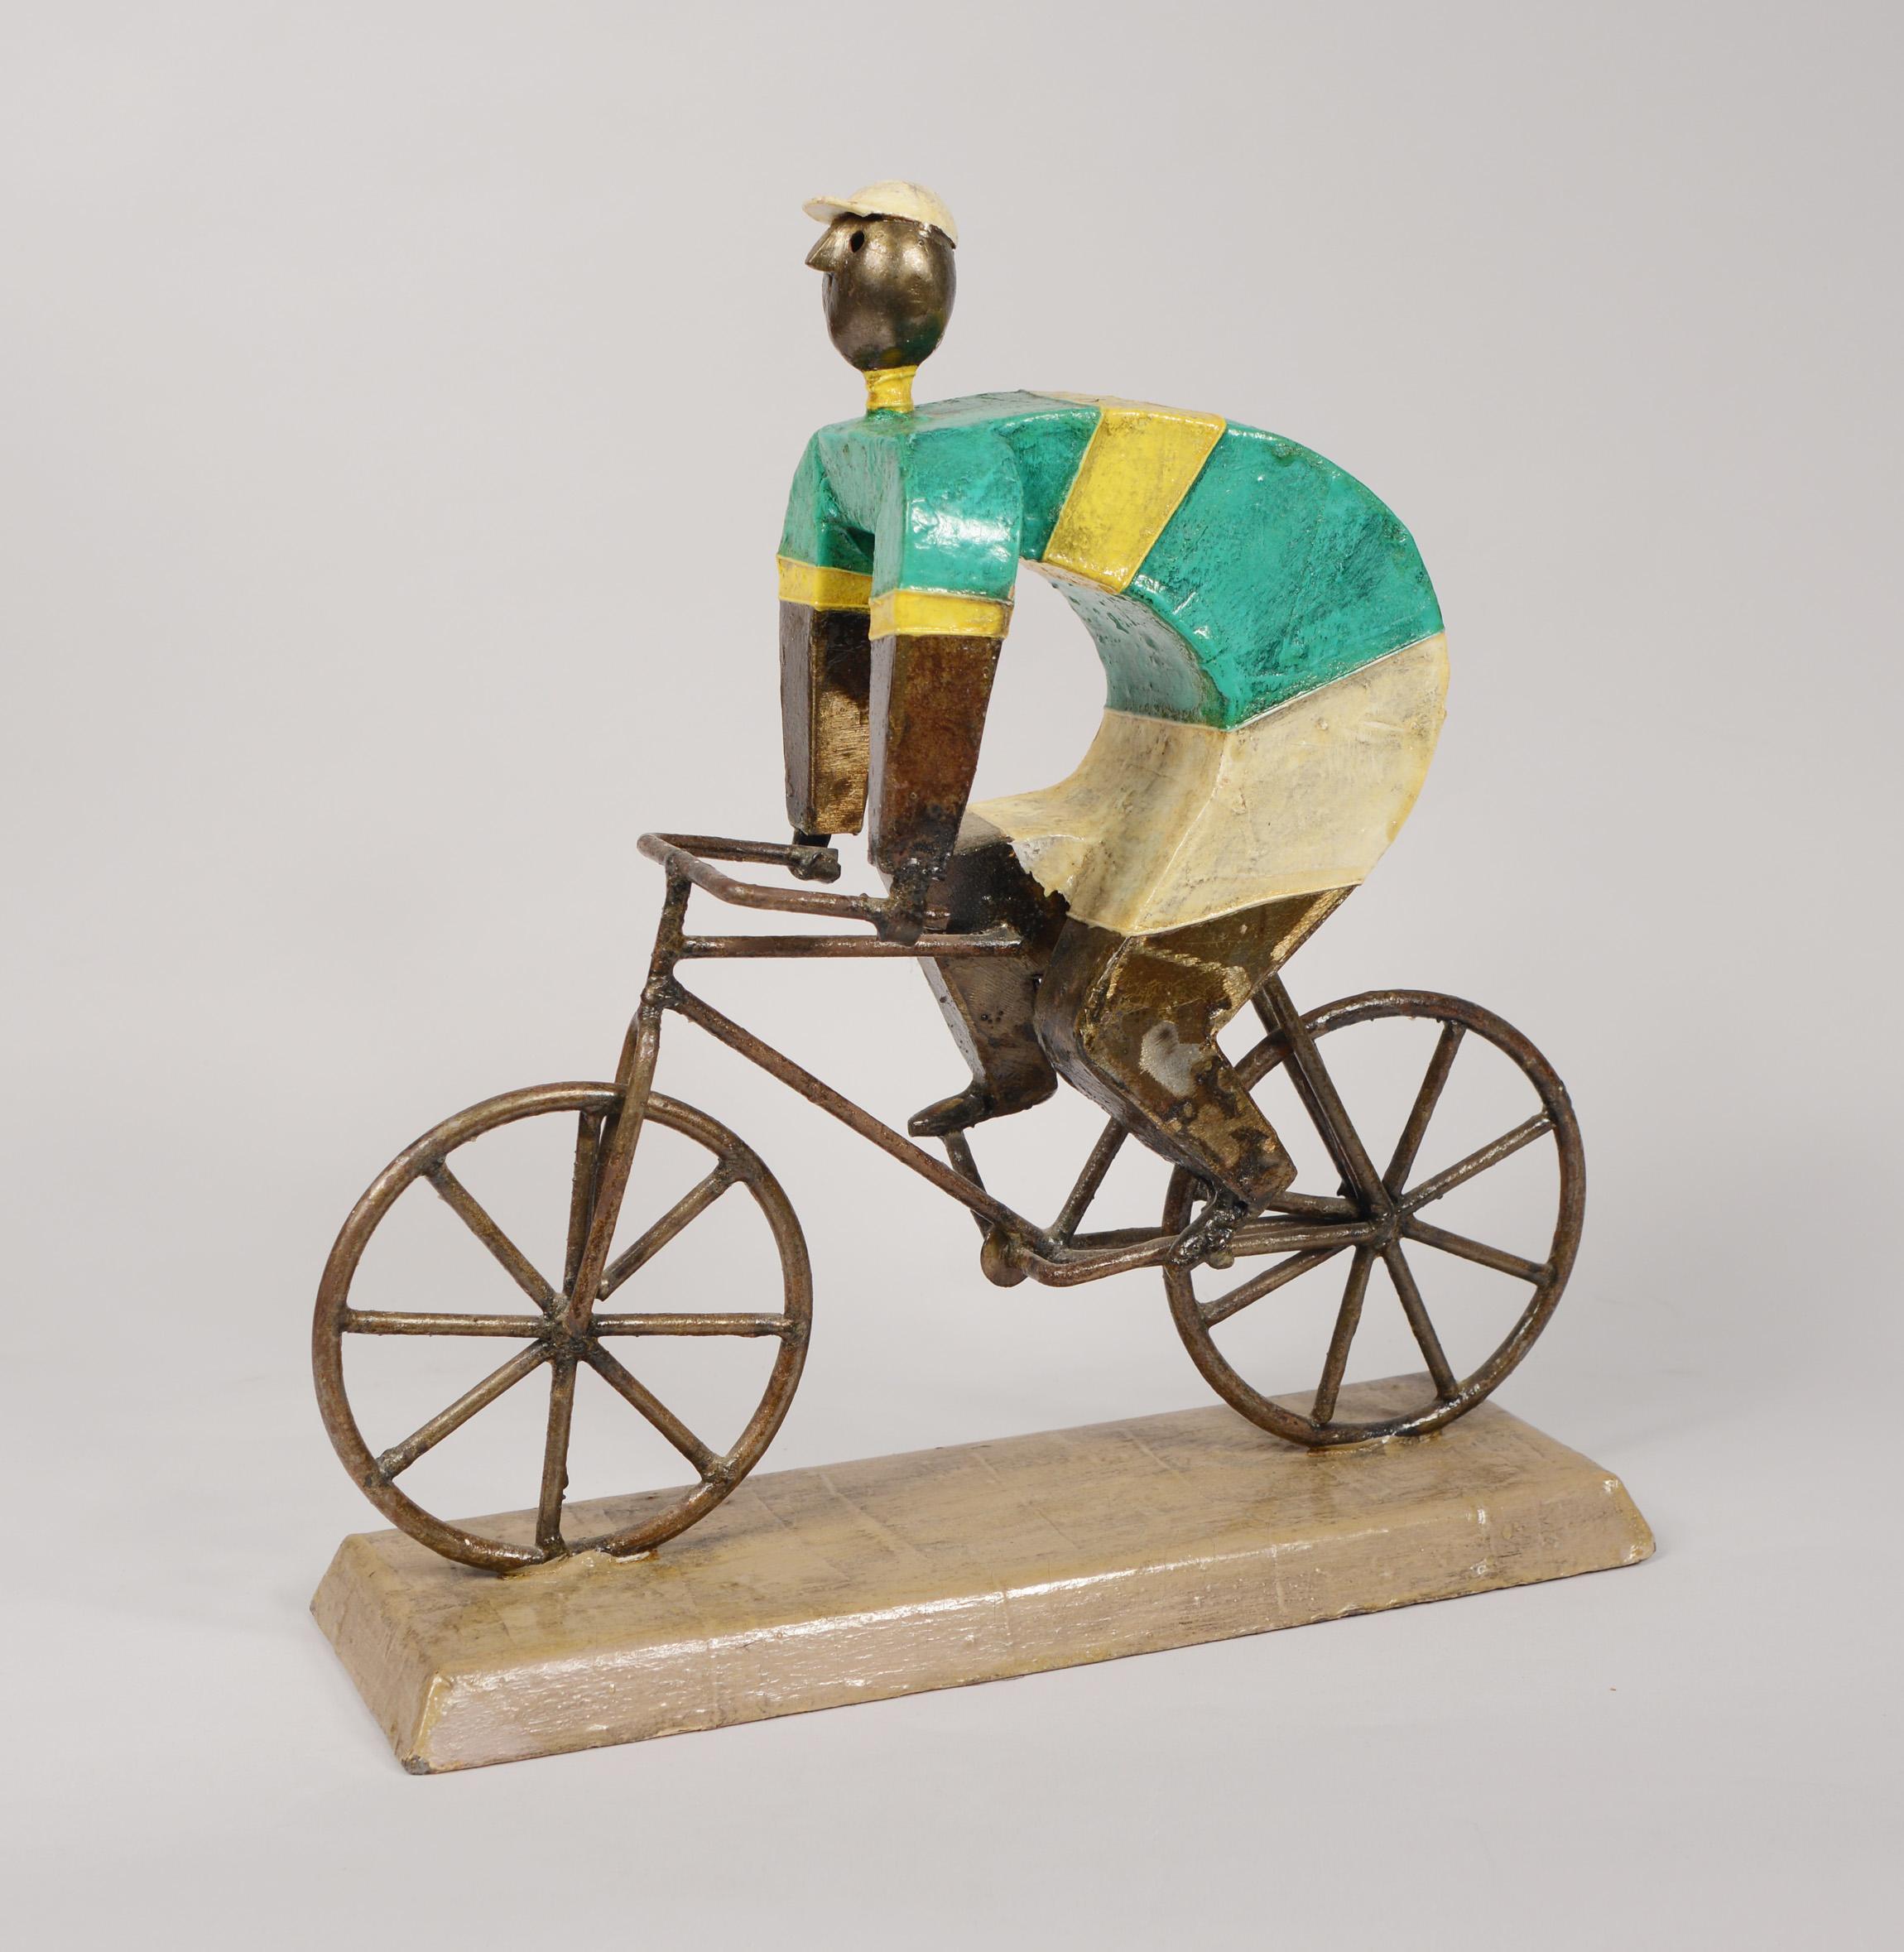 Modernist bicyclist sculpture by Manuel Felguerez. Felguerez designed a number of animal and people sculptures in 1964. The bicyclist is one of the stronger designs. They are made of iron with paper mache.